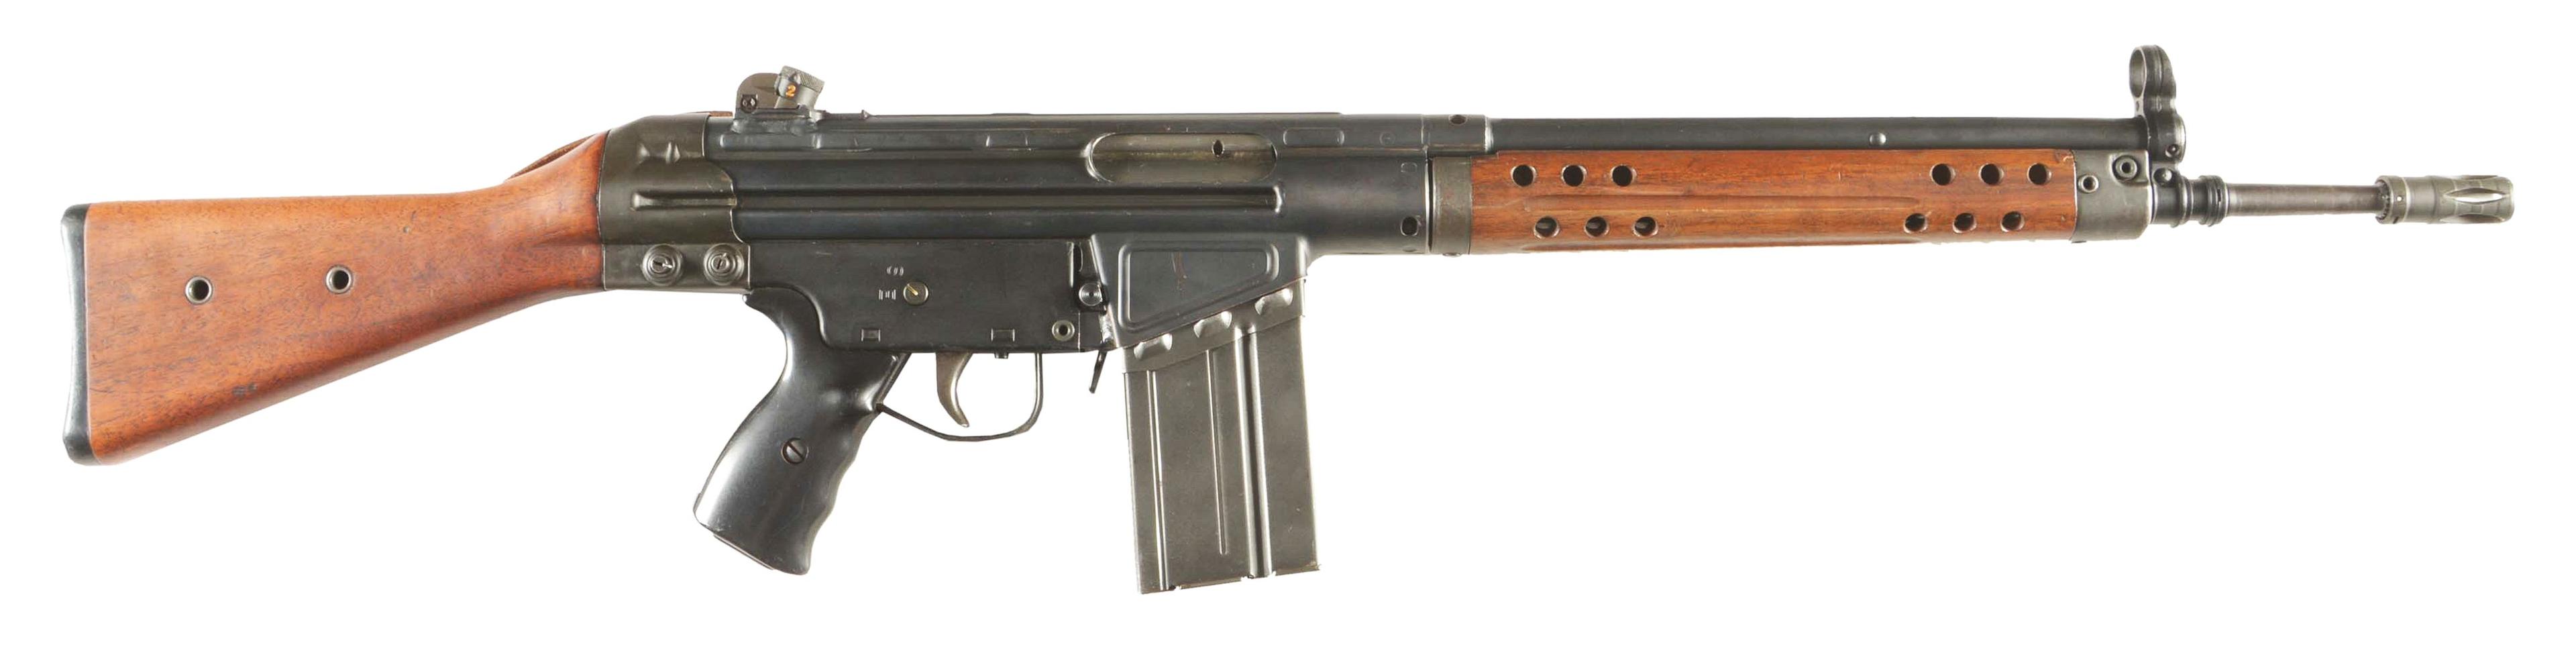 (M) SANTA FE DIVISON OF GOLDEN STATE ARMS CO. HK G3 SEMI-AUTOMATIC RIFLE.